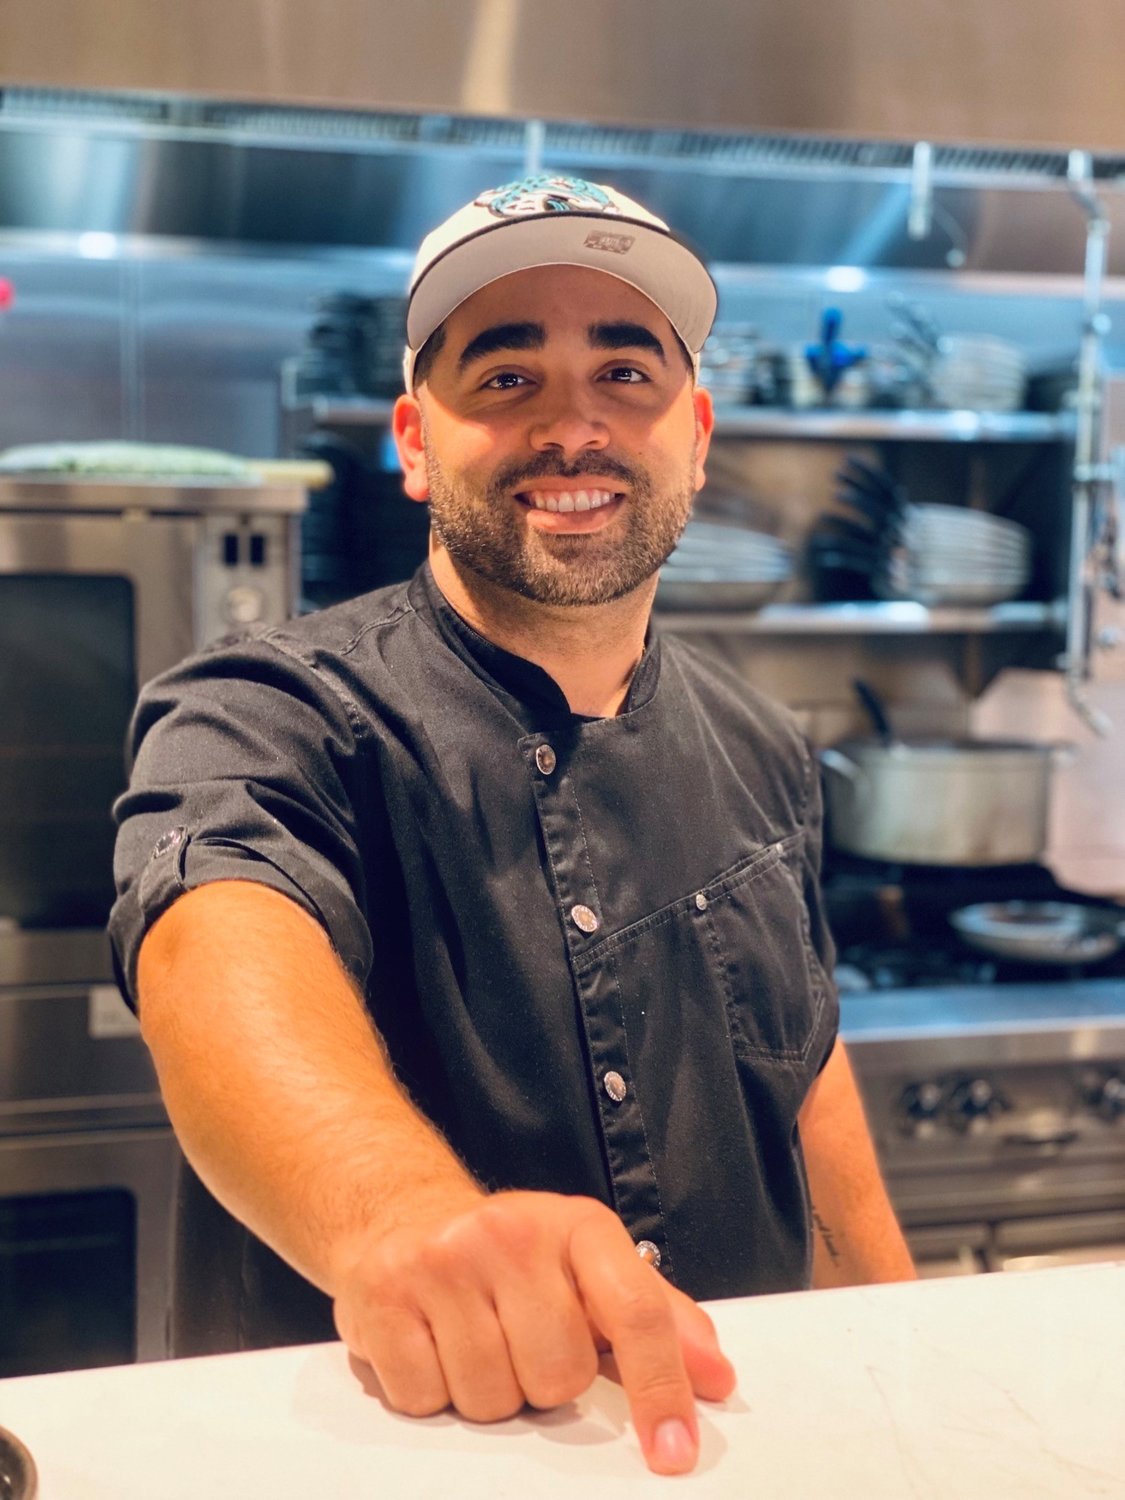 Chef Michel R. Richardson began his career at a school in Las Vegas. Today, he is executive chef/chef de cuisine for the Castillo Craft Bar + Kitchen in St. Augustine.